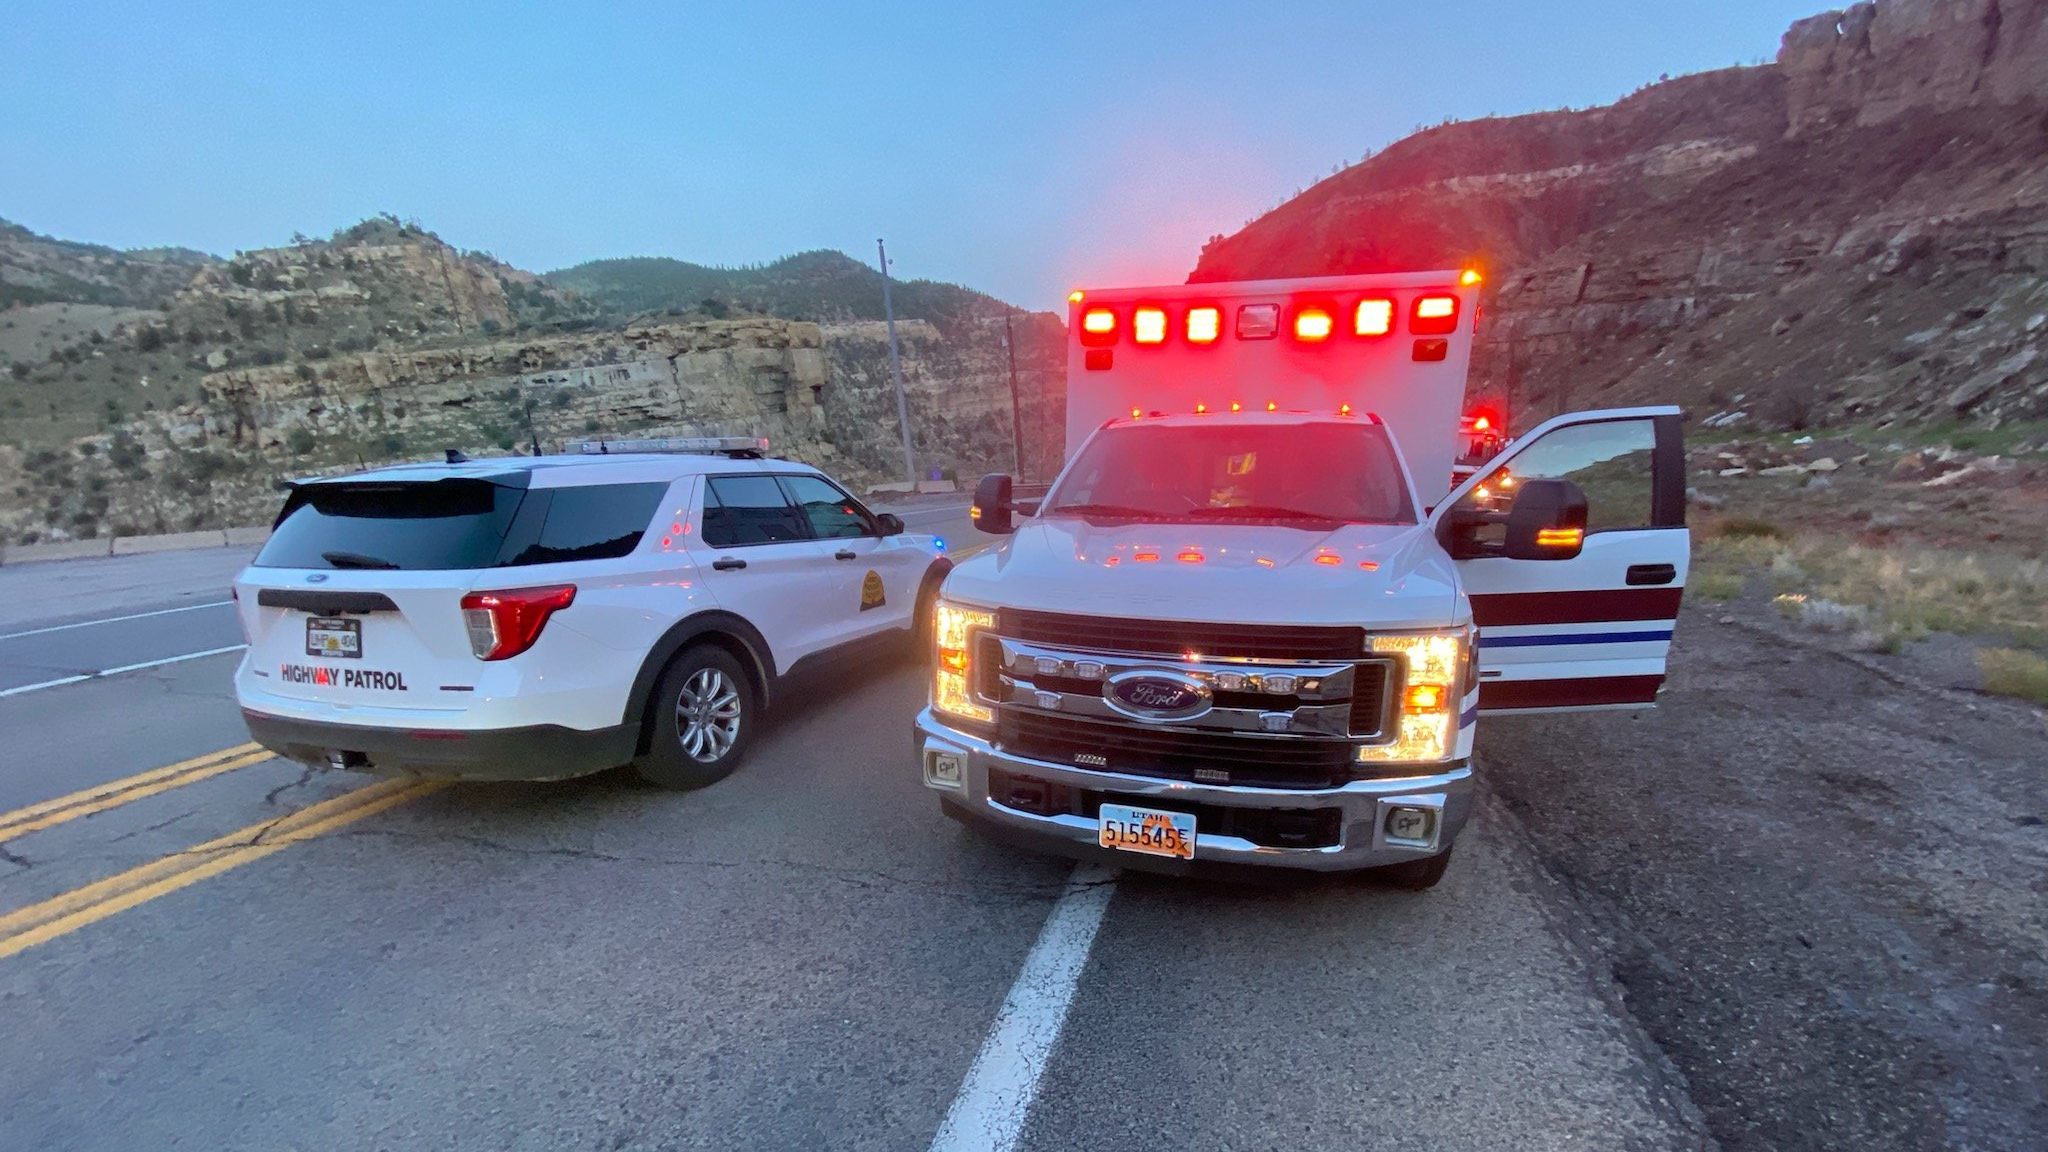 The rock slide happened Sunday night and injured a couple who were traveling in an SUV. Photo: Hel...